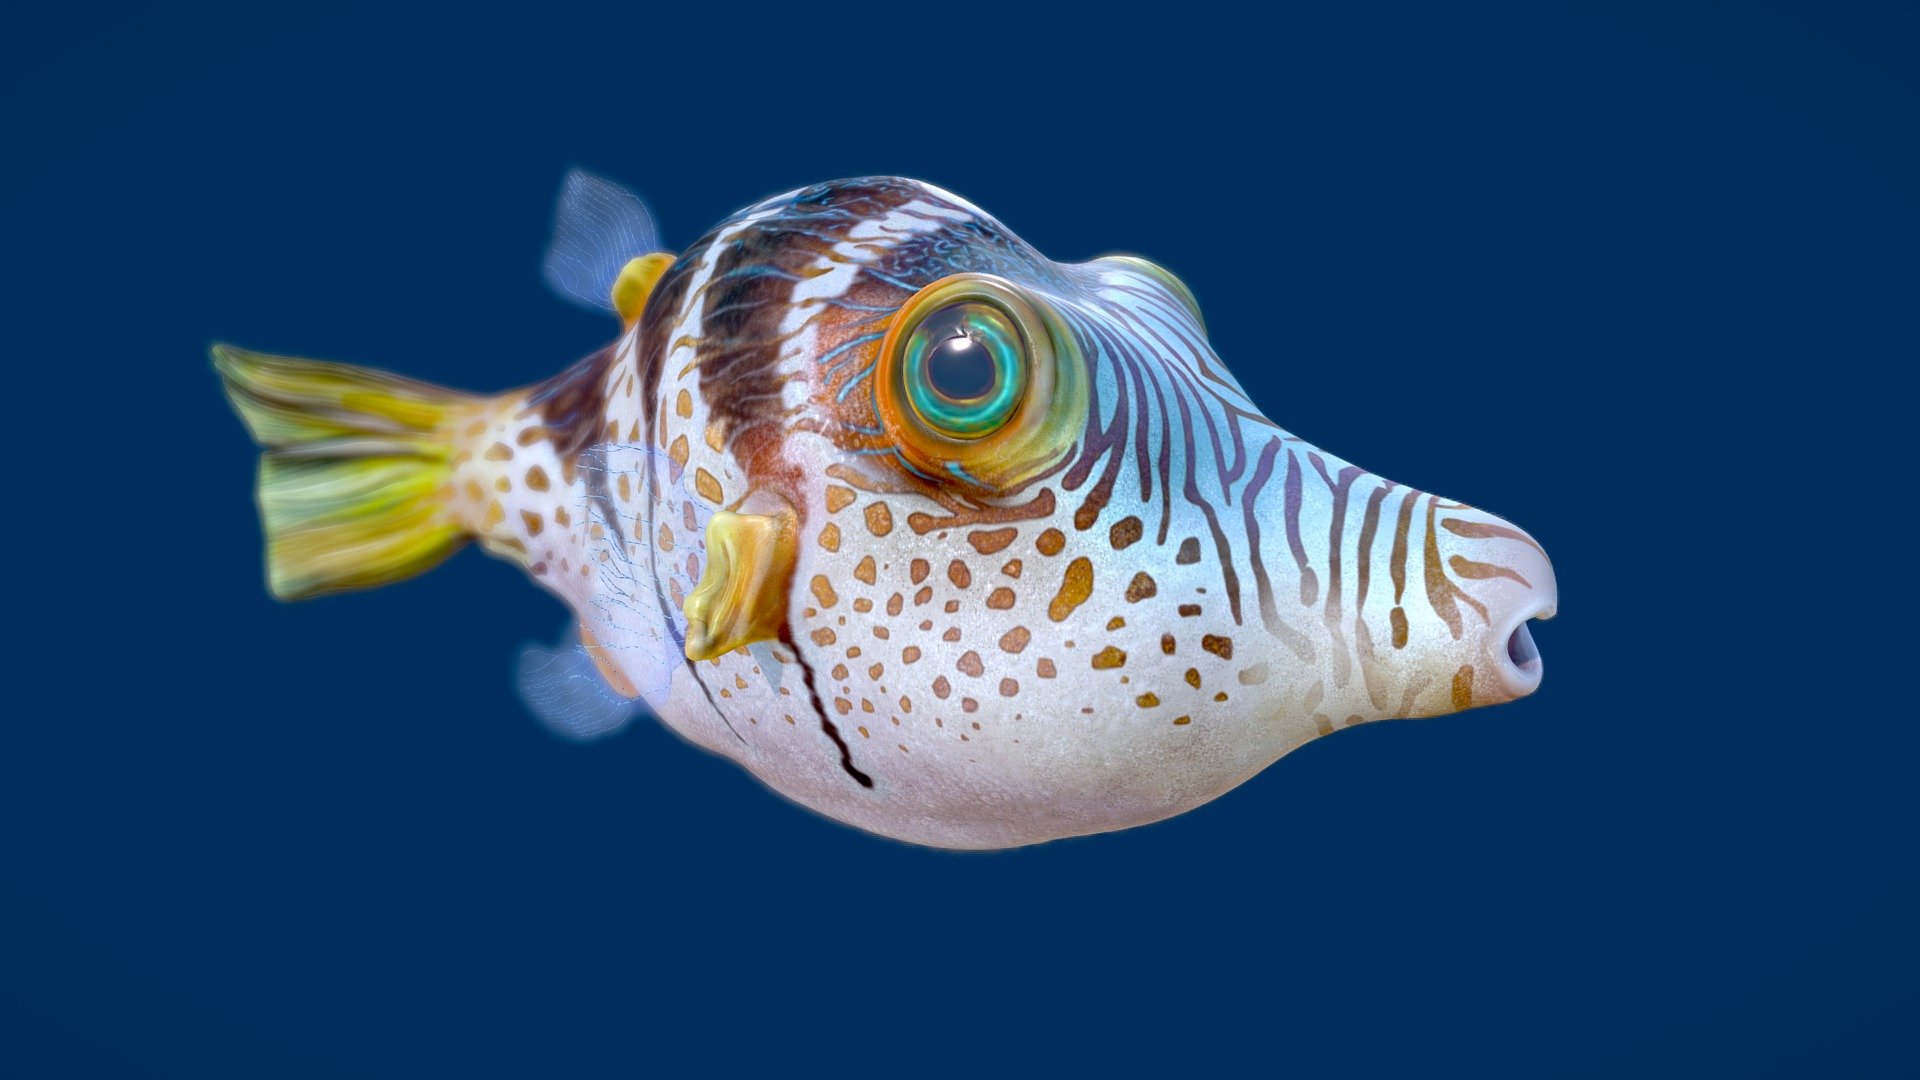 I saw one in Madagacar this summer, it's got a cute and funny cartoon face with amazing colors so I really had to do one in 3D to work texturing! =D

I leave you swim with him

https://www.artstation.com/artwork/Dl5GR - Valentinni's sharpnose puffer - Buy Royalty Free 3D model by zag_girard 3d model